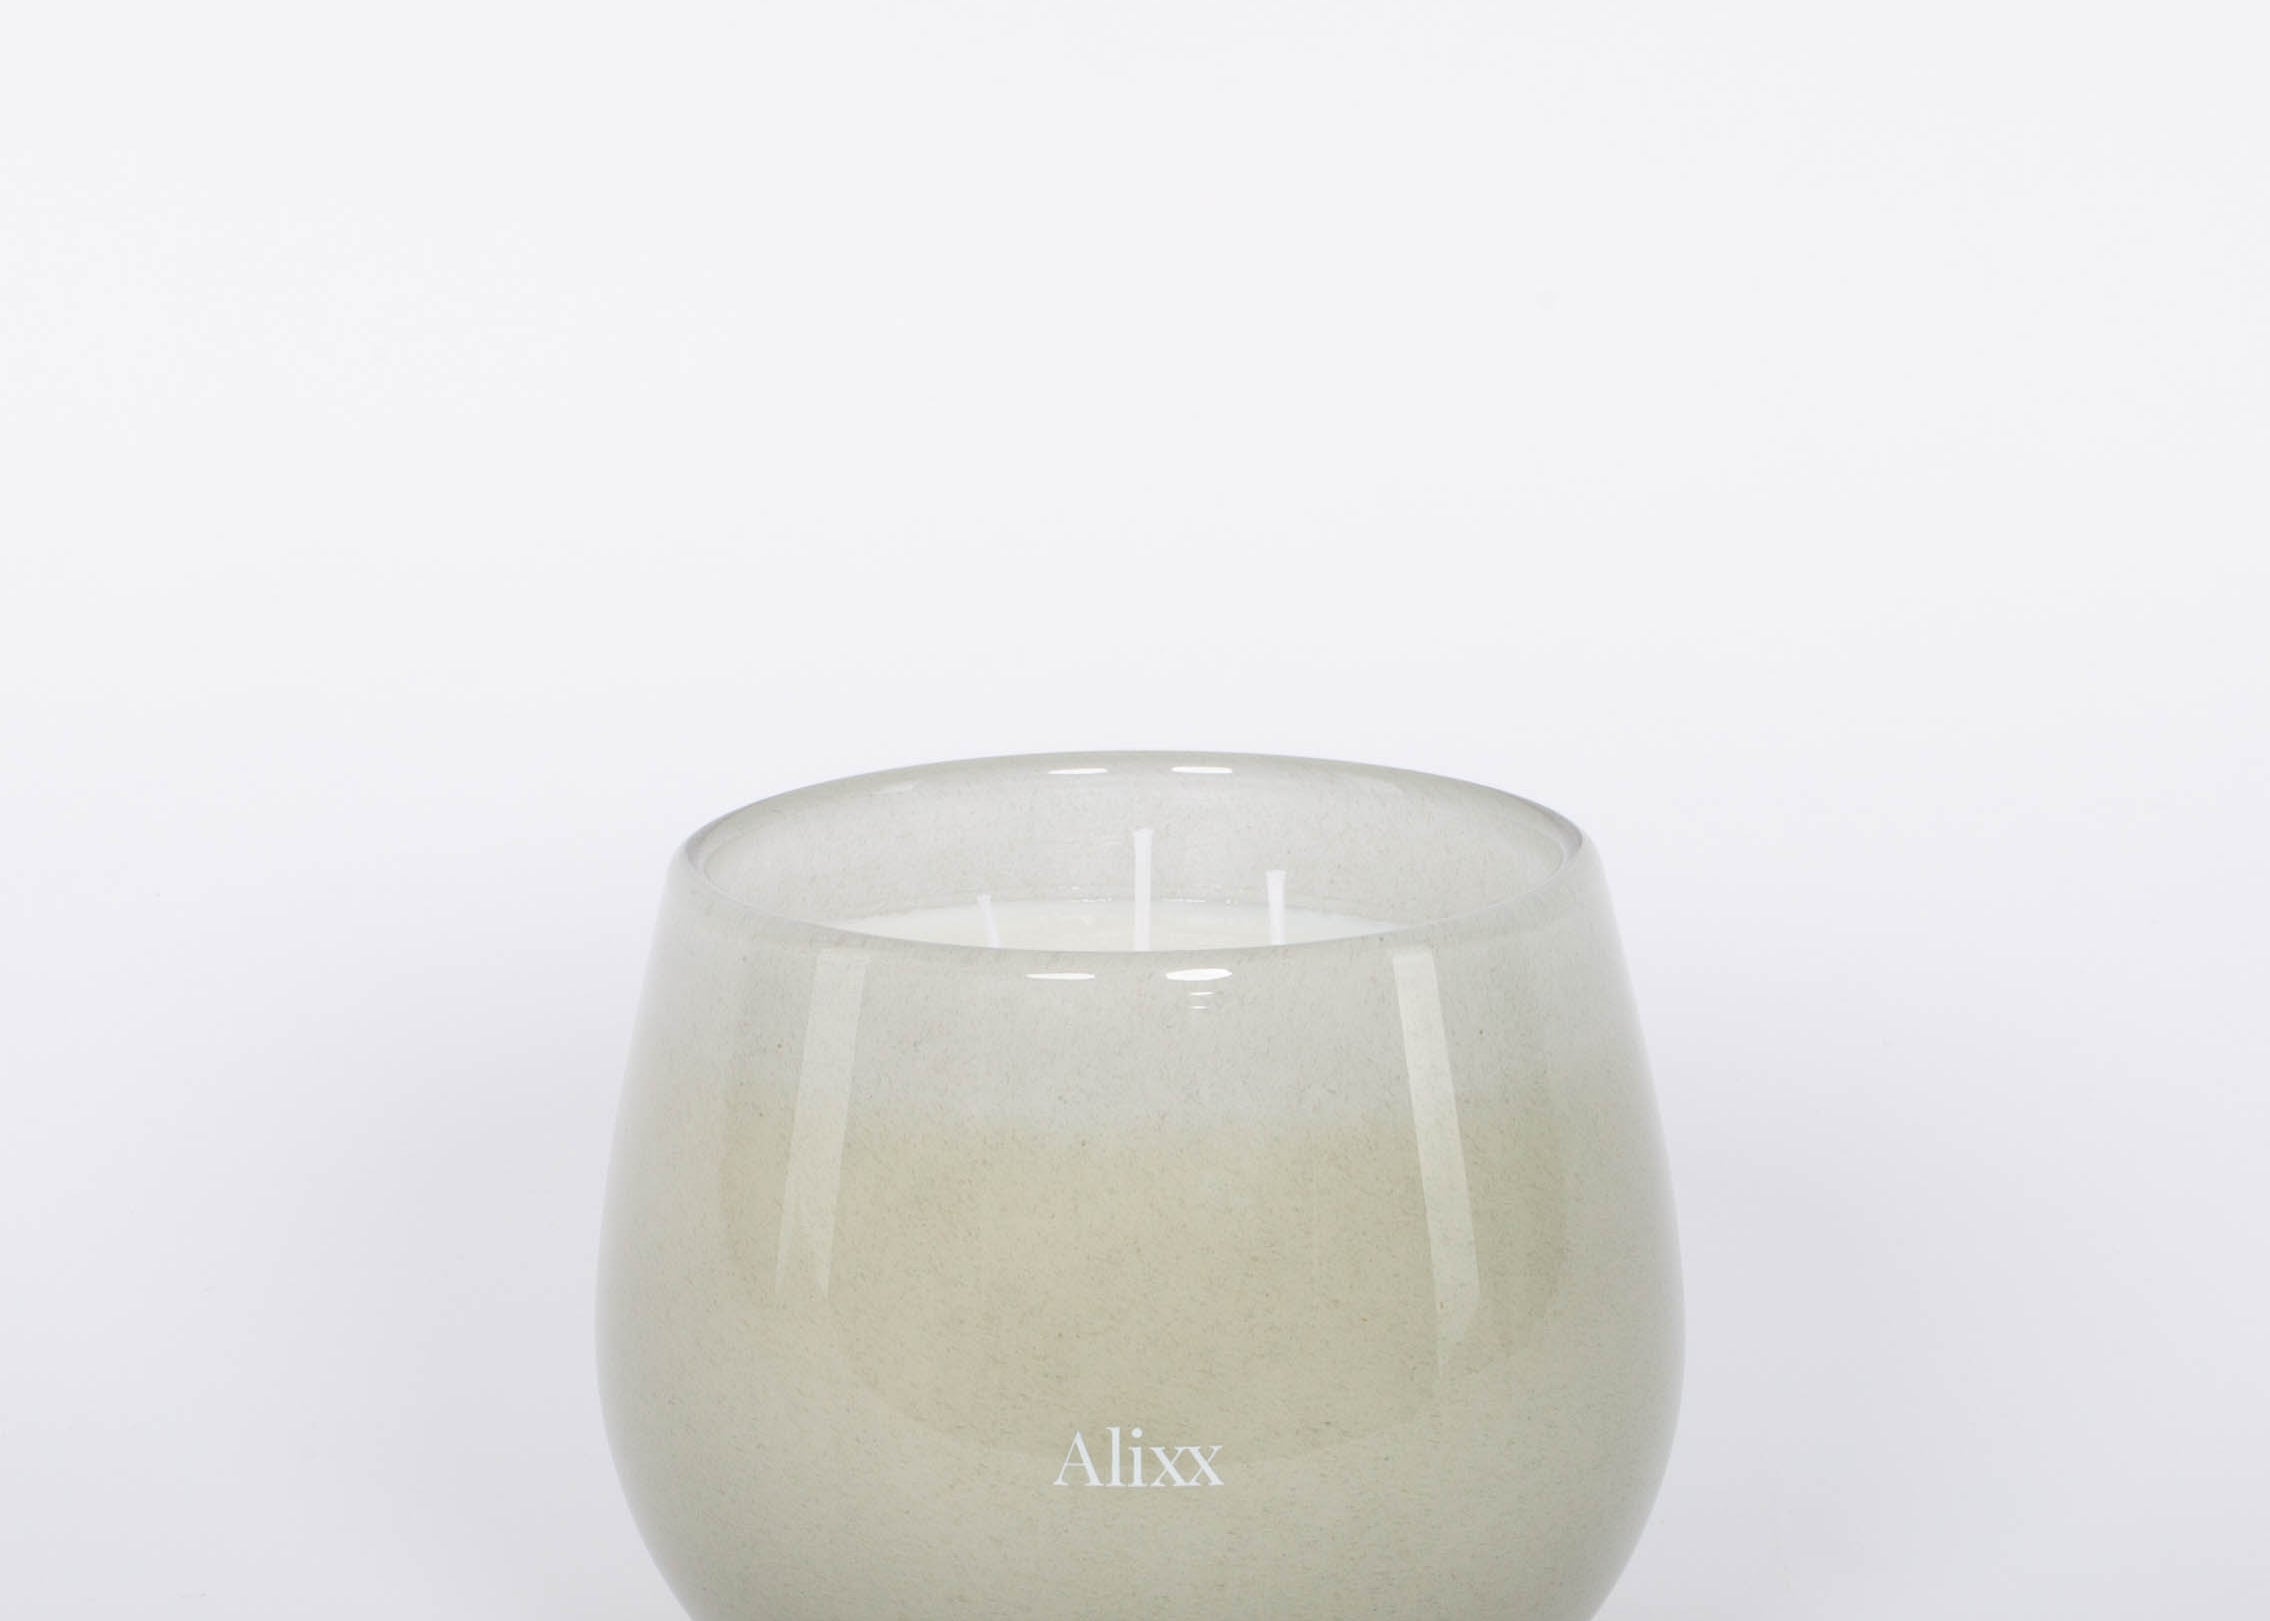 Paris inspired Salon De Tabac white two wick candle by Alixx with earthy oak wood, warm bourbon, and sweet plum nectar fragrance.  White background.